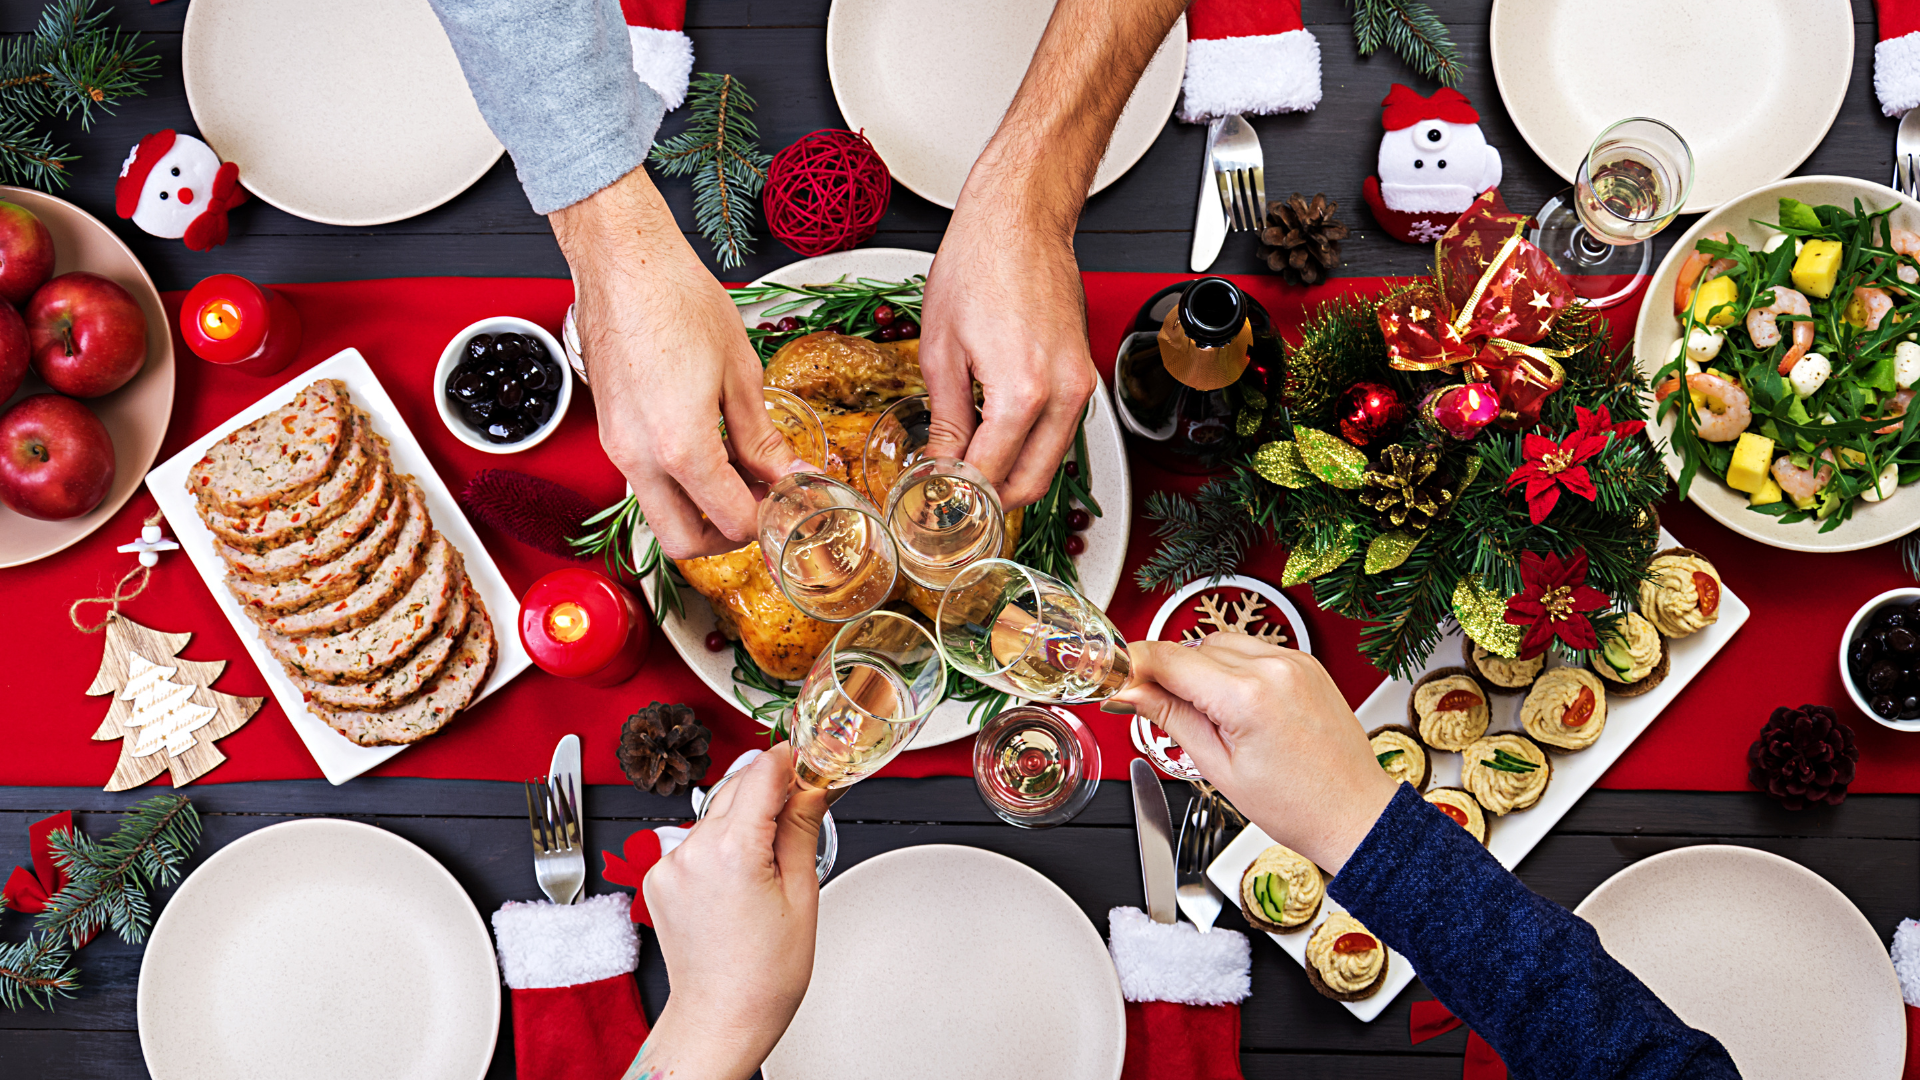 Get the Holiday Season Started Right with these Delicious Christmas Dinner Ideas!